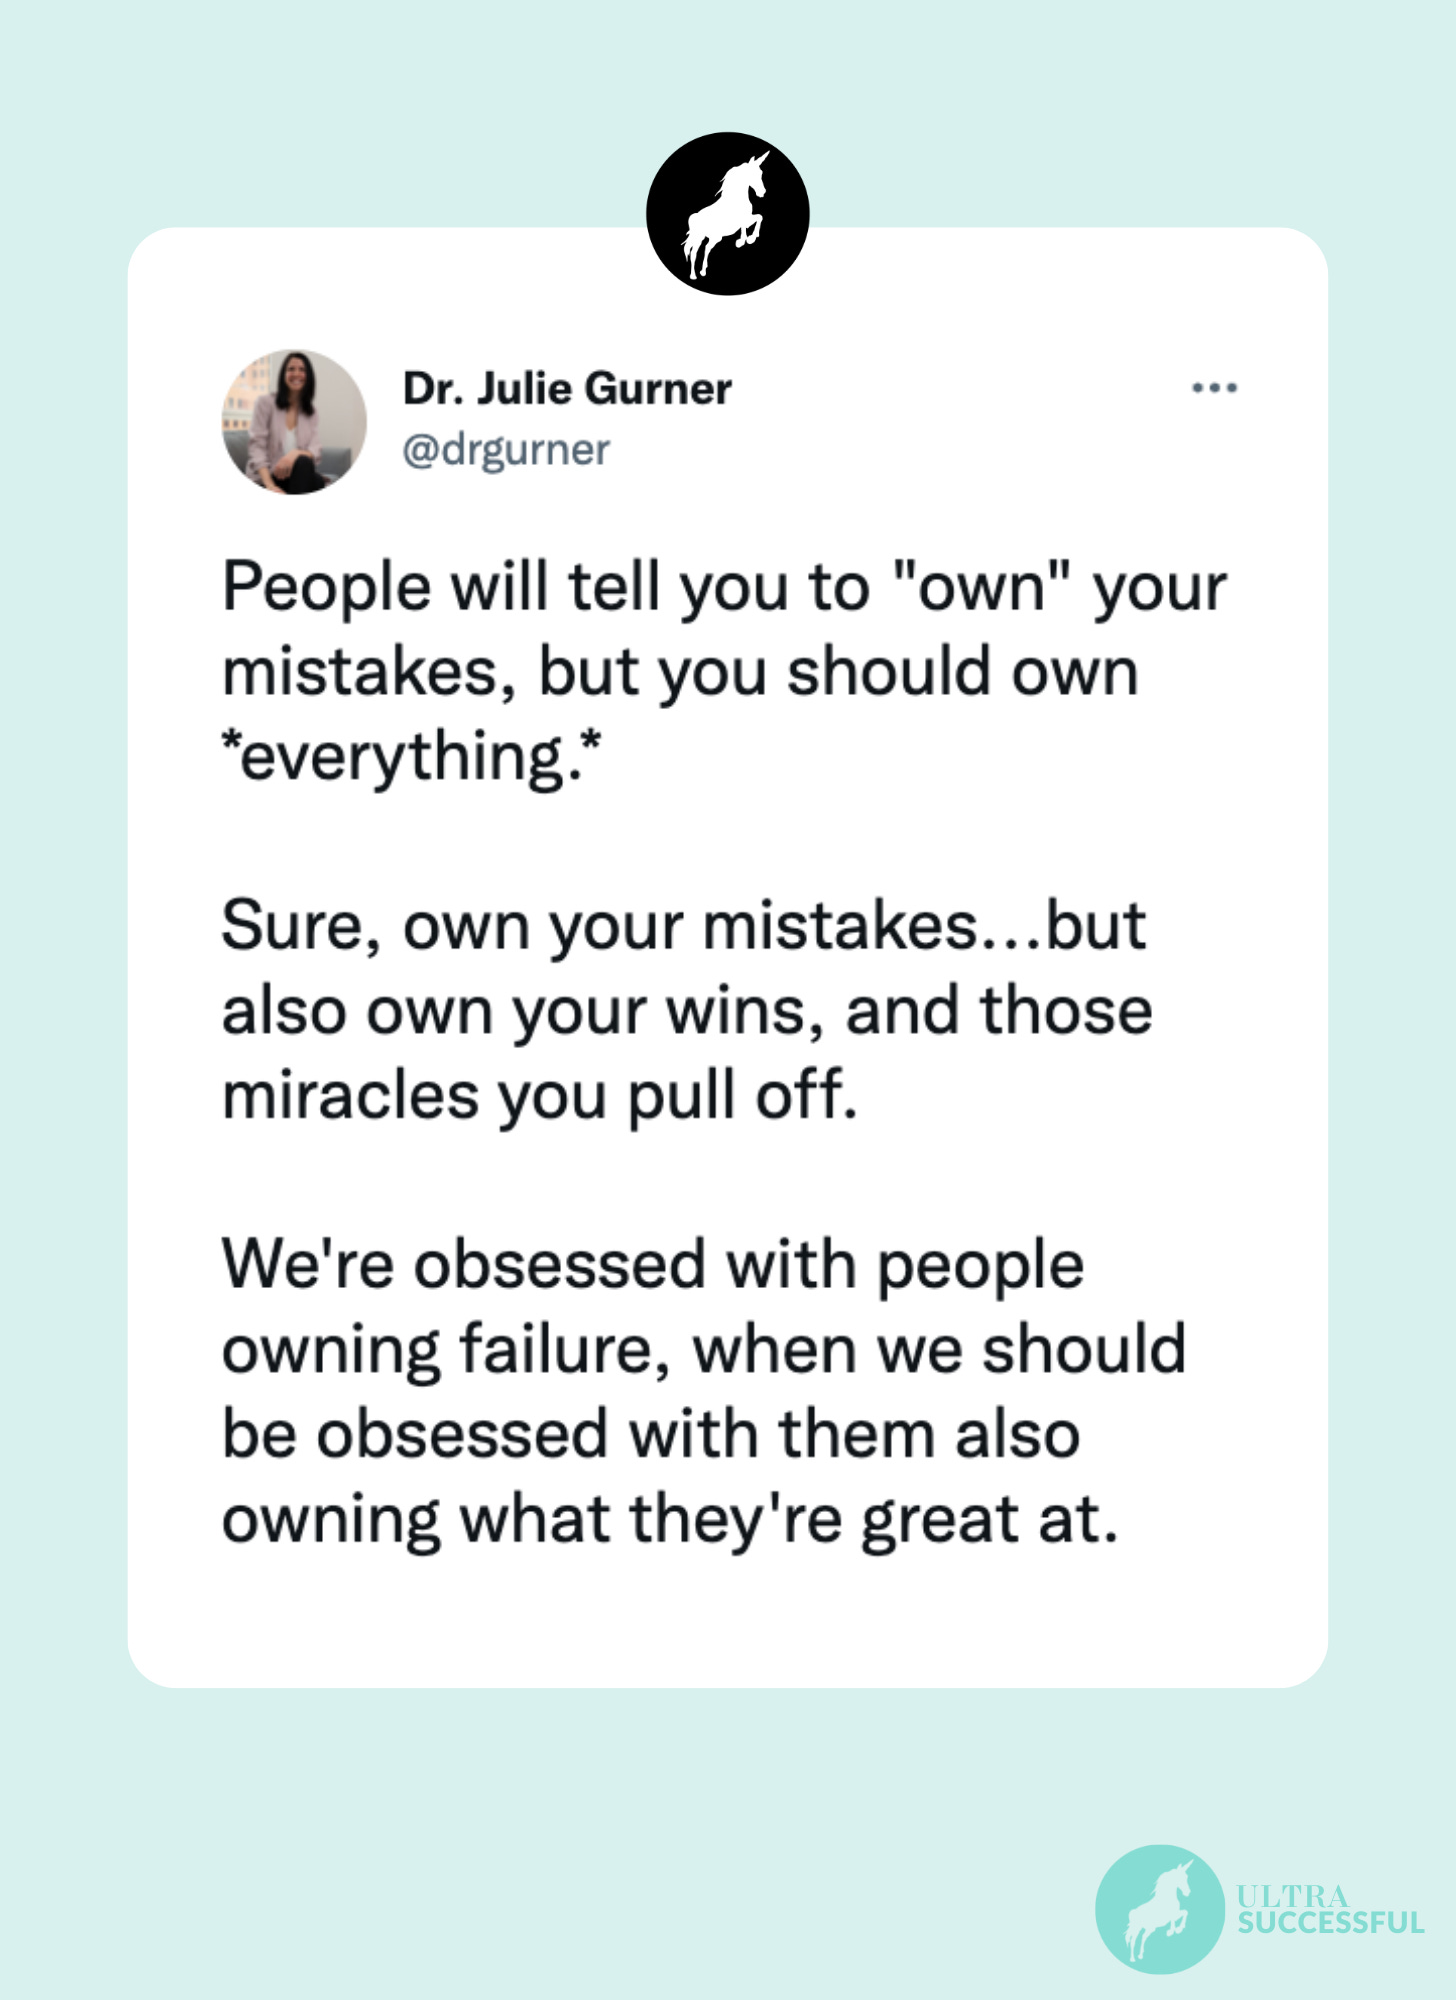 @drgurner: People will tell you to "own" your mistakes, but you should own *everything.*  Sure, own your mistakes...but also own your wins, and those miracles you pull off.  We're obsessed with people owning failure, when we should be obsessed with them also owning what they're great at.